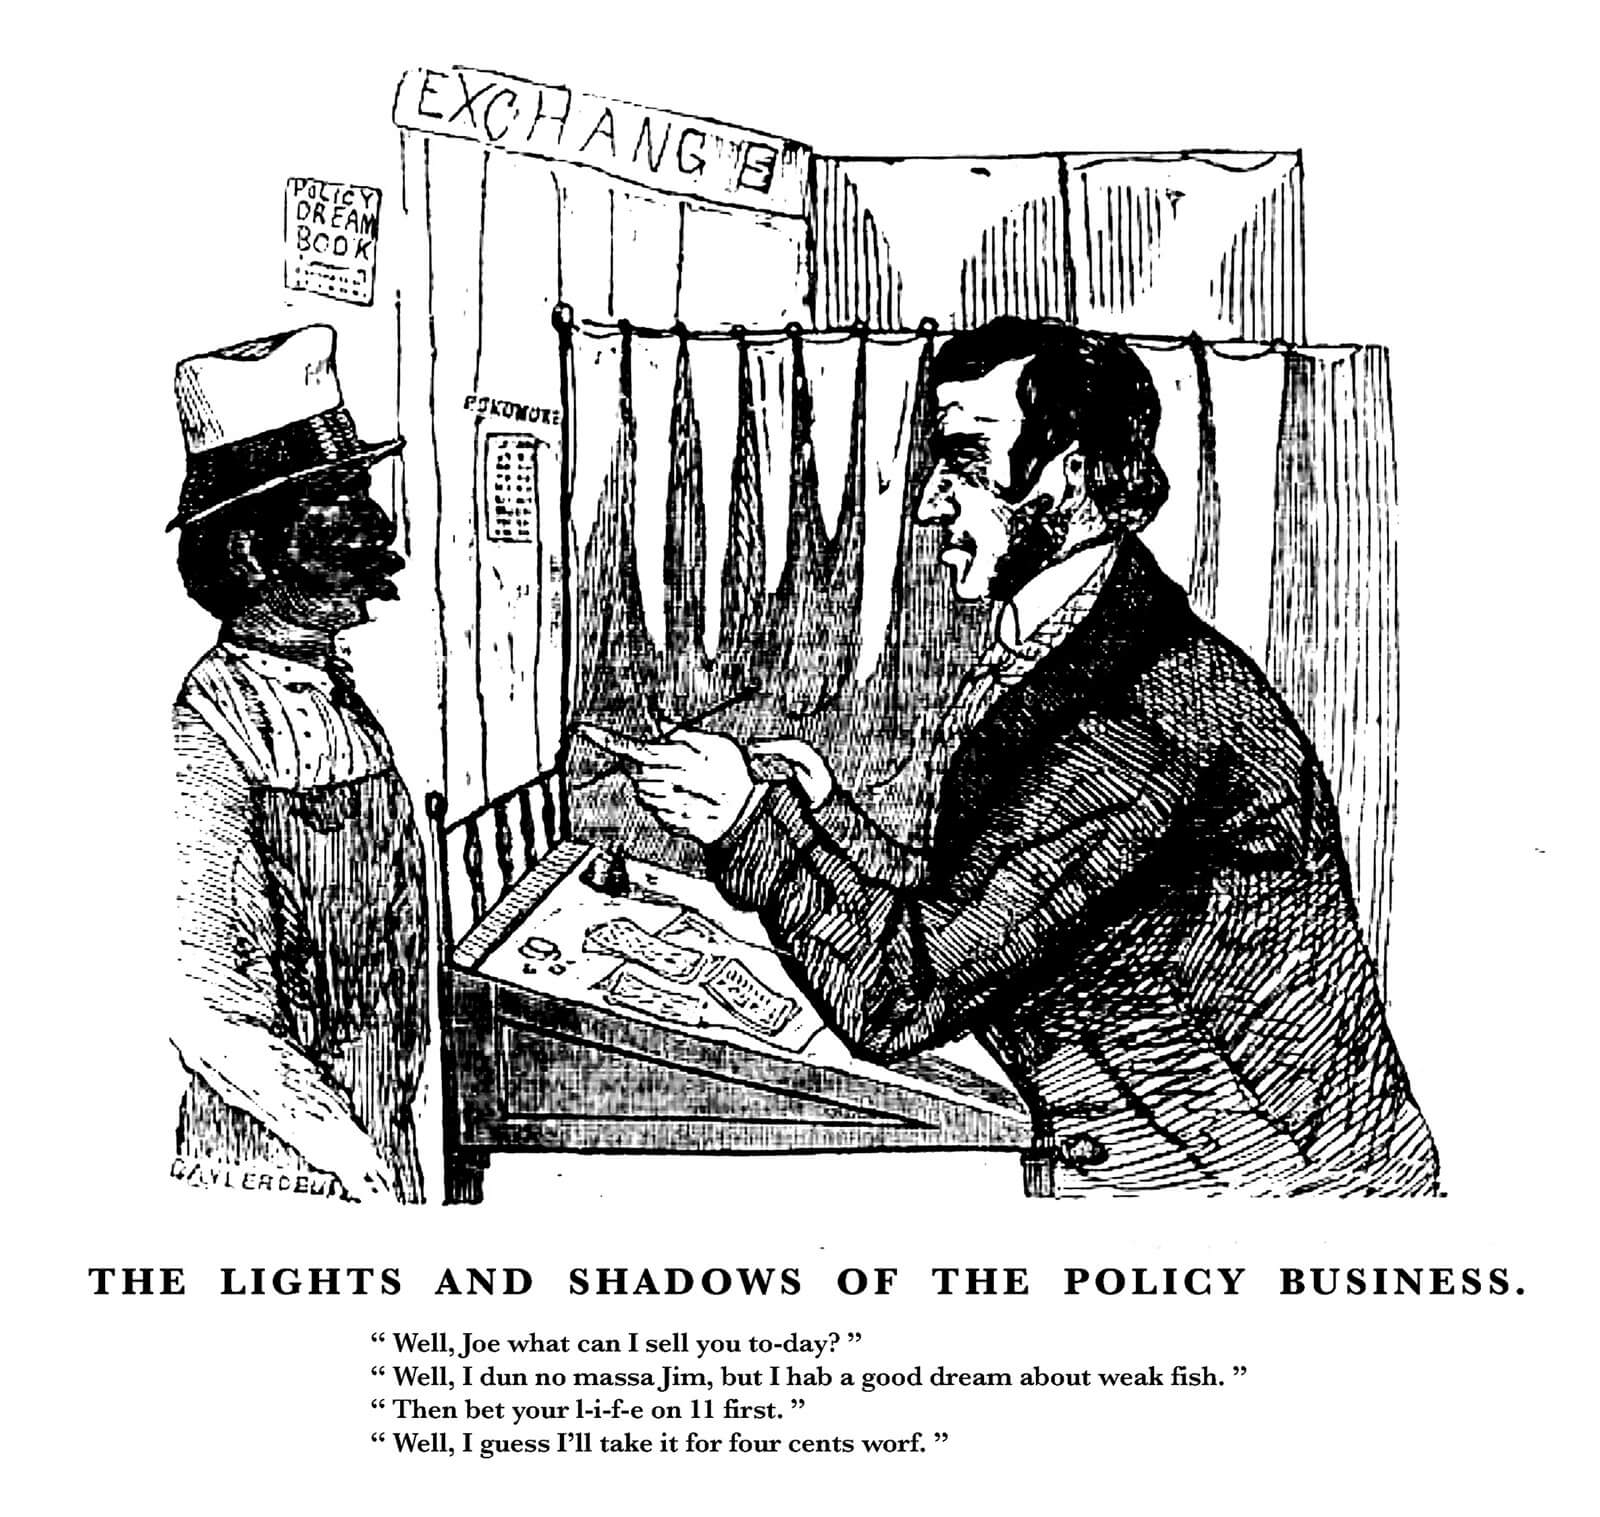 “The Lights and Shadows of the Policy Business,” a racist caricature that appeared in the National Police Gazette on 1 July 1848.